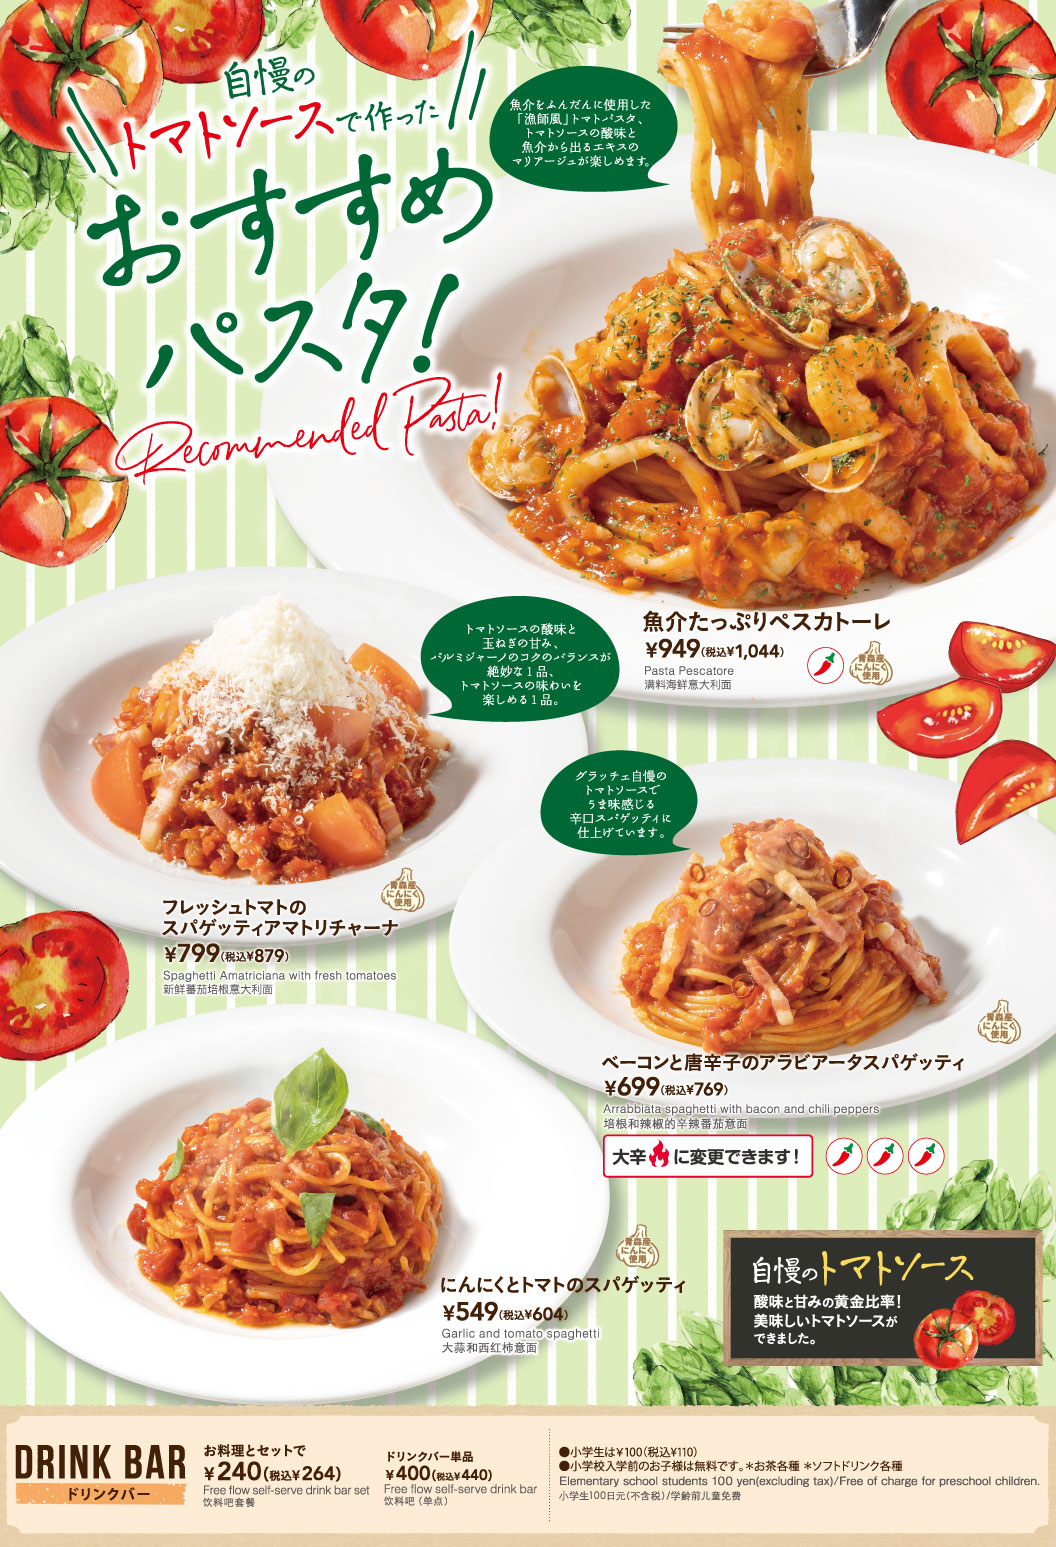 Recommended pasta made with our proud tomato sauce